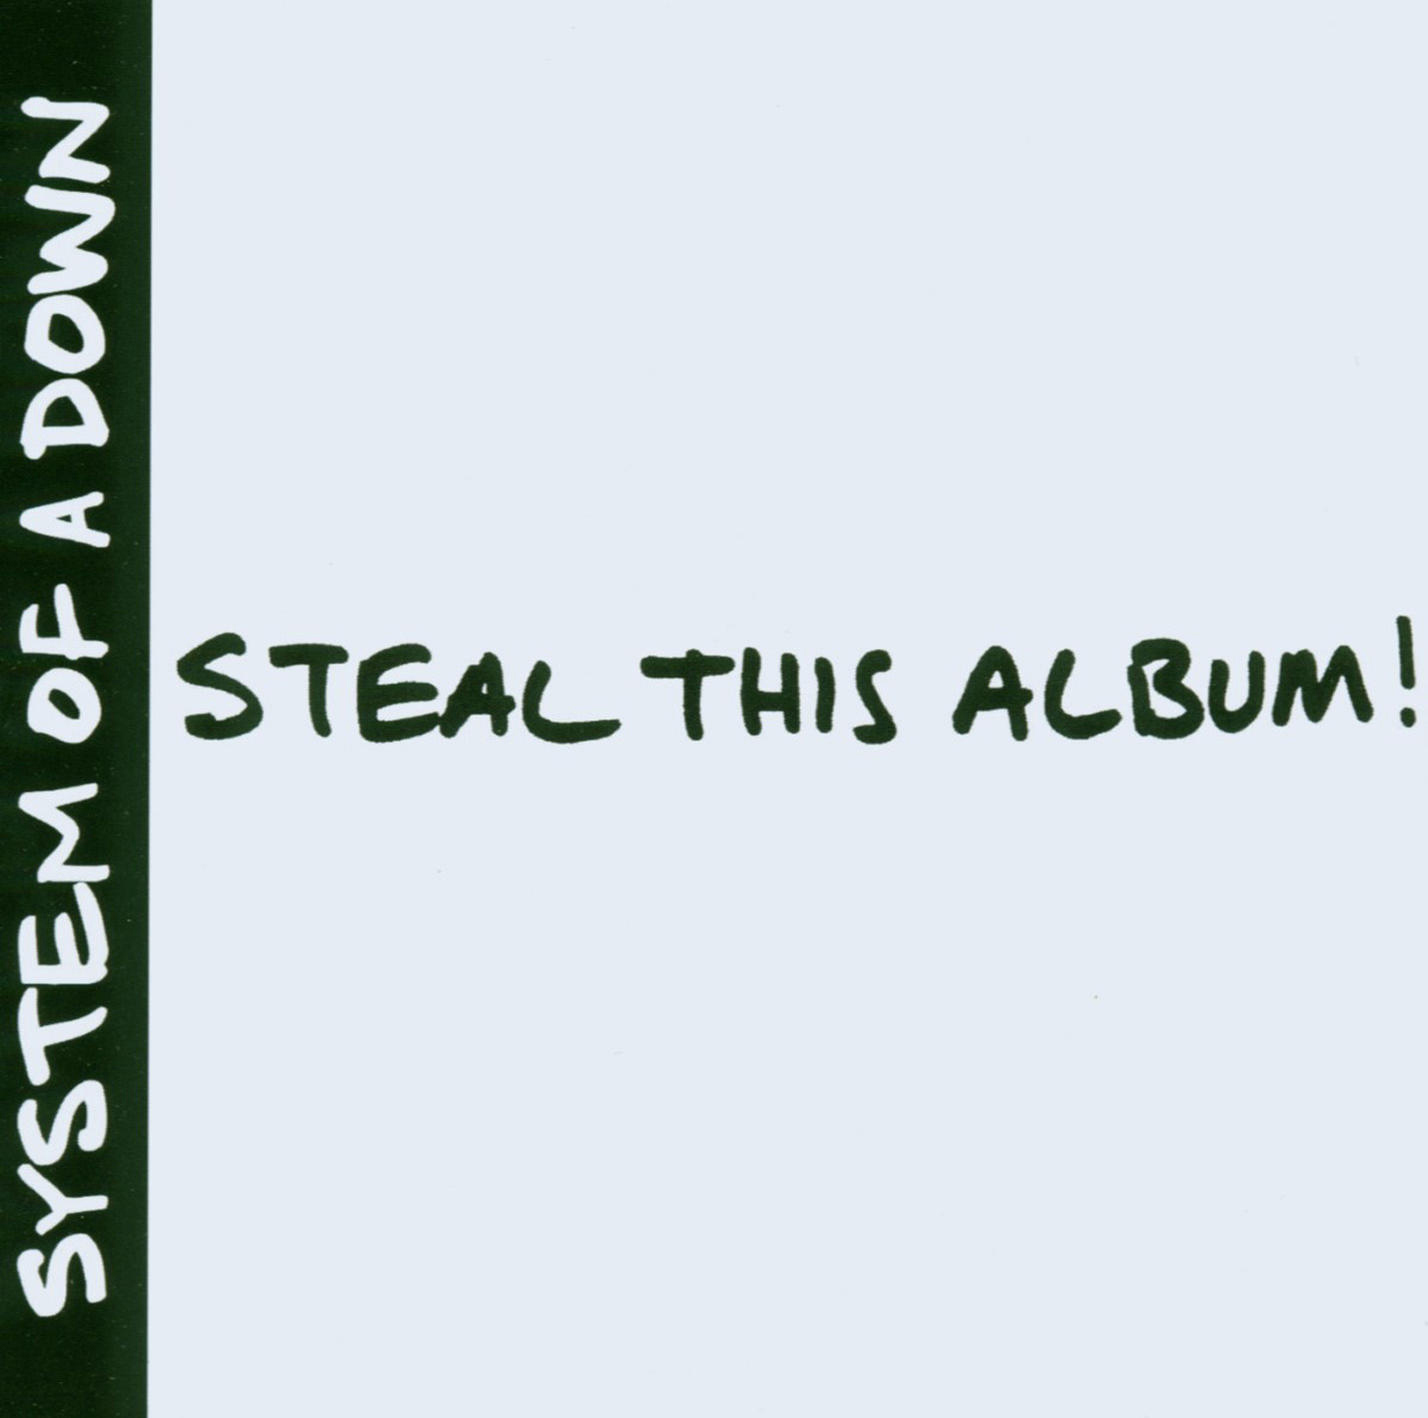 (Vinyl) Of A Album! Down This Steal - - System